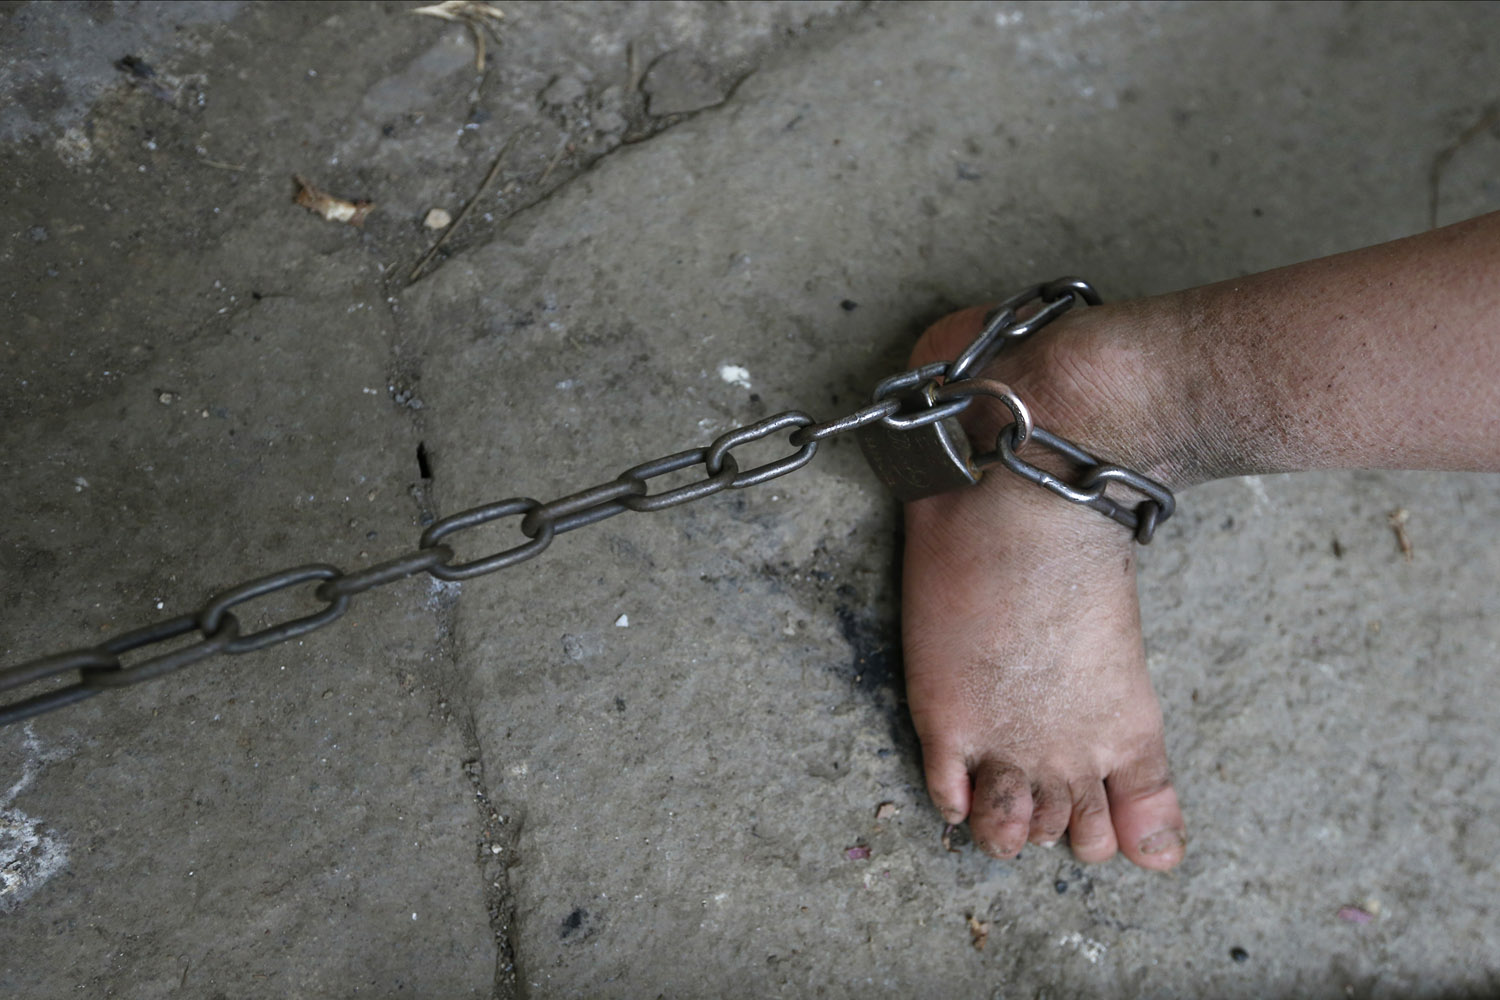 Nov. 27, 2013. The chains around the ankle of eleven-year-old He Zili is seen in his home in Zhejiang province, China.